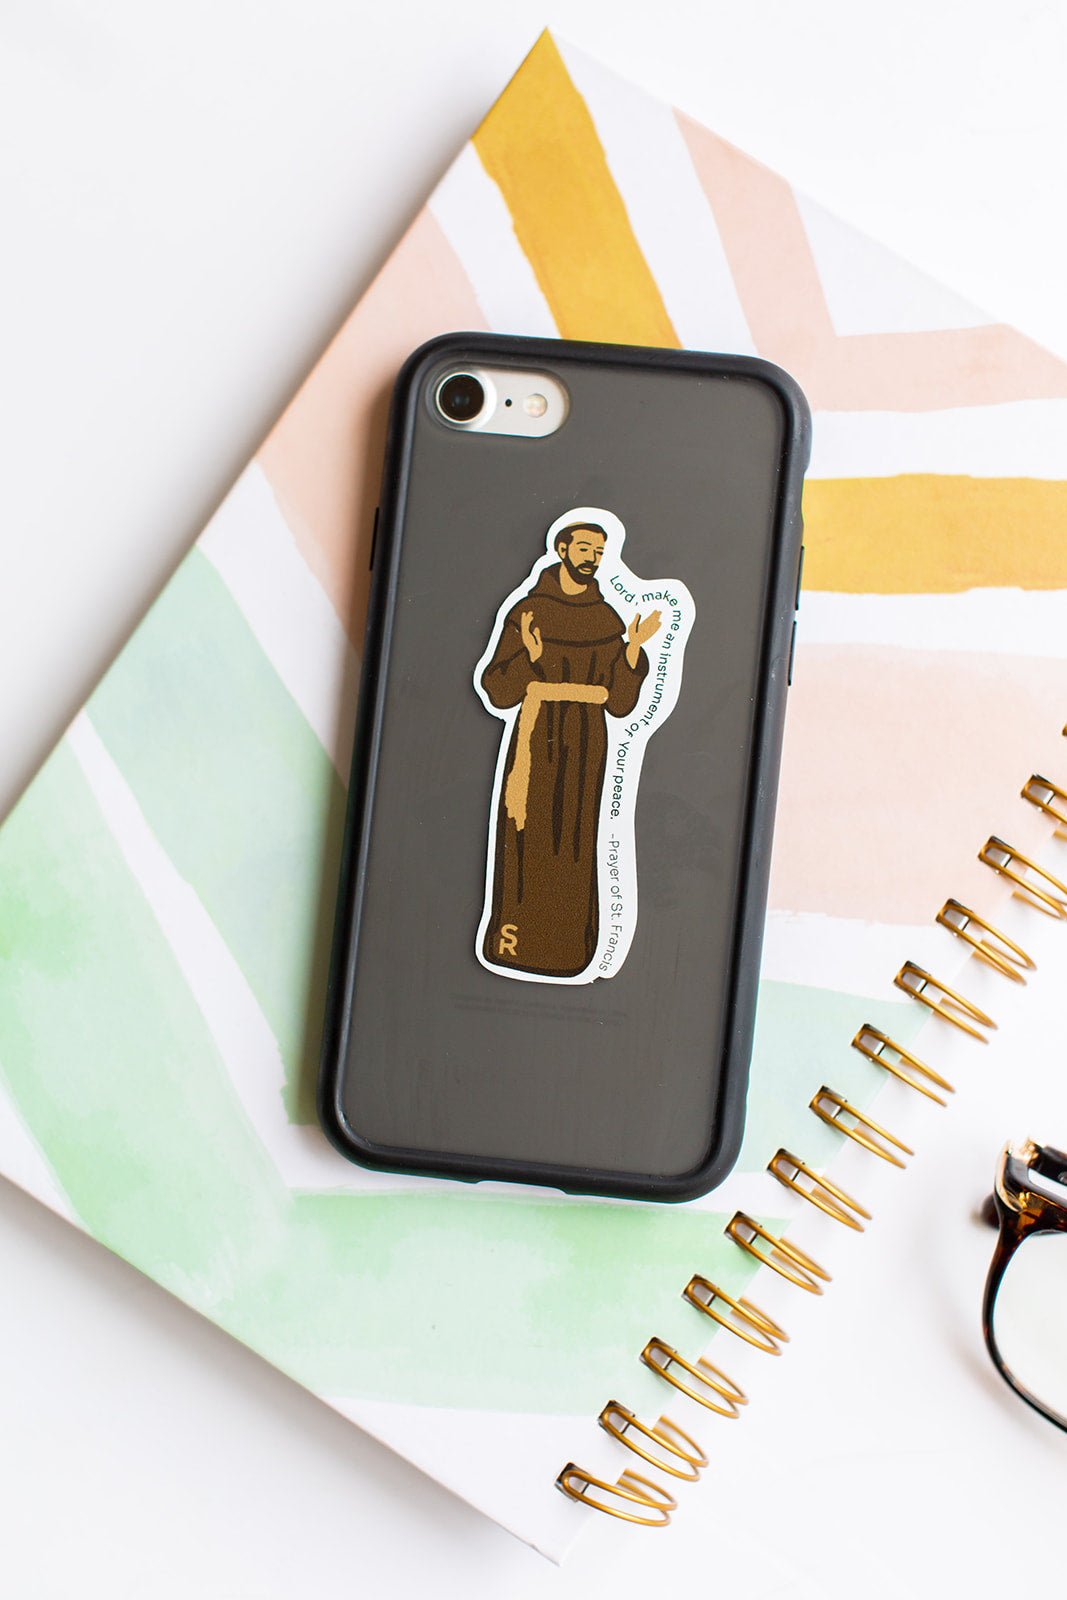 St. Francis of Assisi Sticker 10-pack